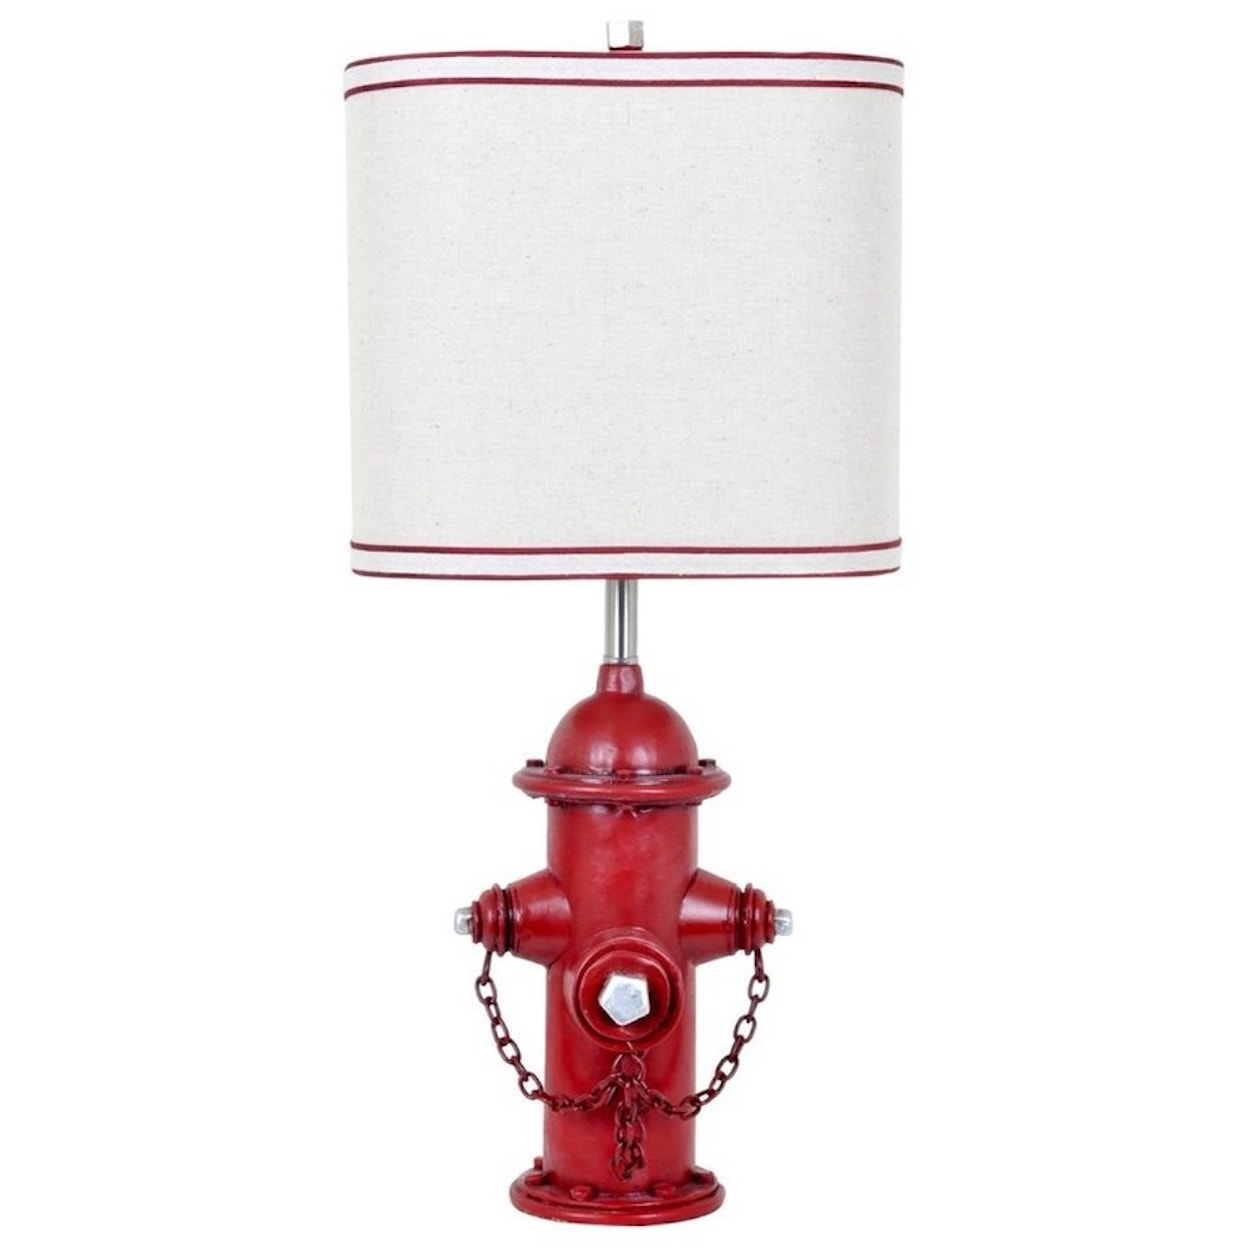 Crestview Collection Lighting Hydrant Table Lamp